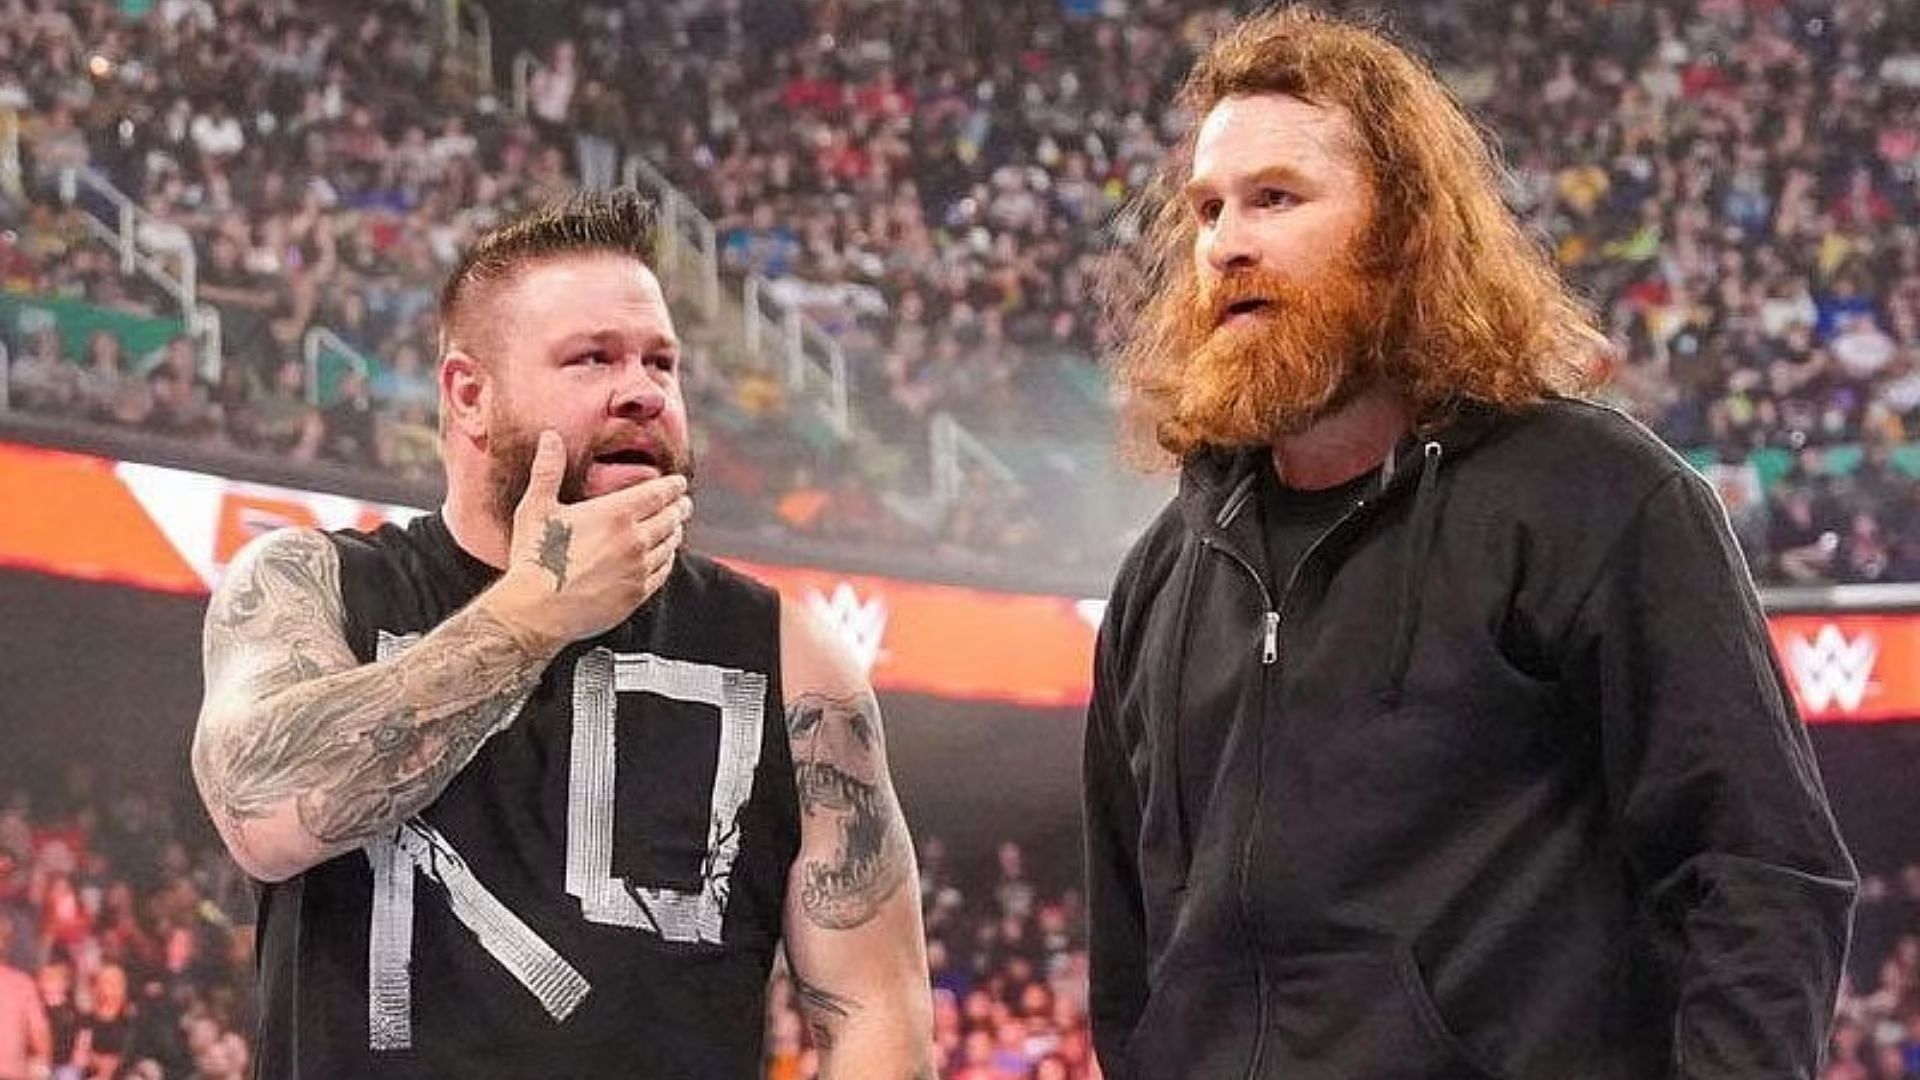 It looks like more trouble is coming in the way of the Undisputed WWE Tag Team Champions!